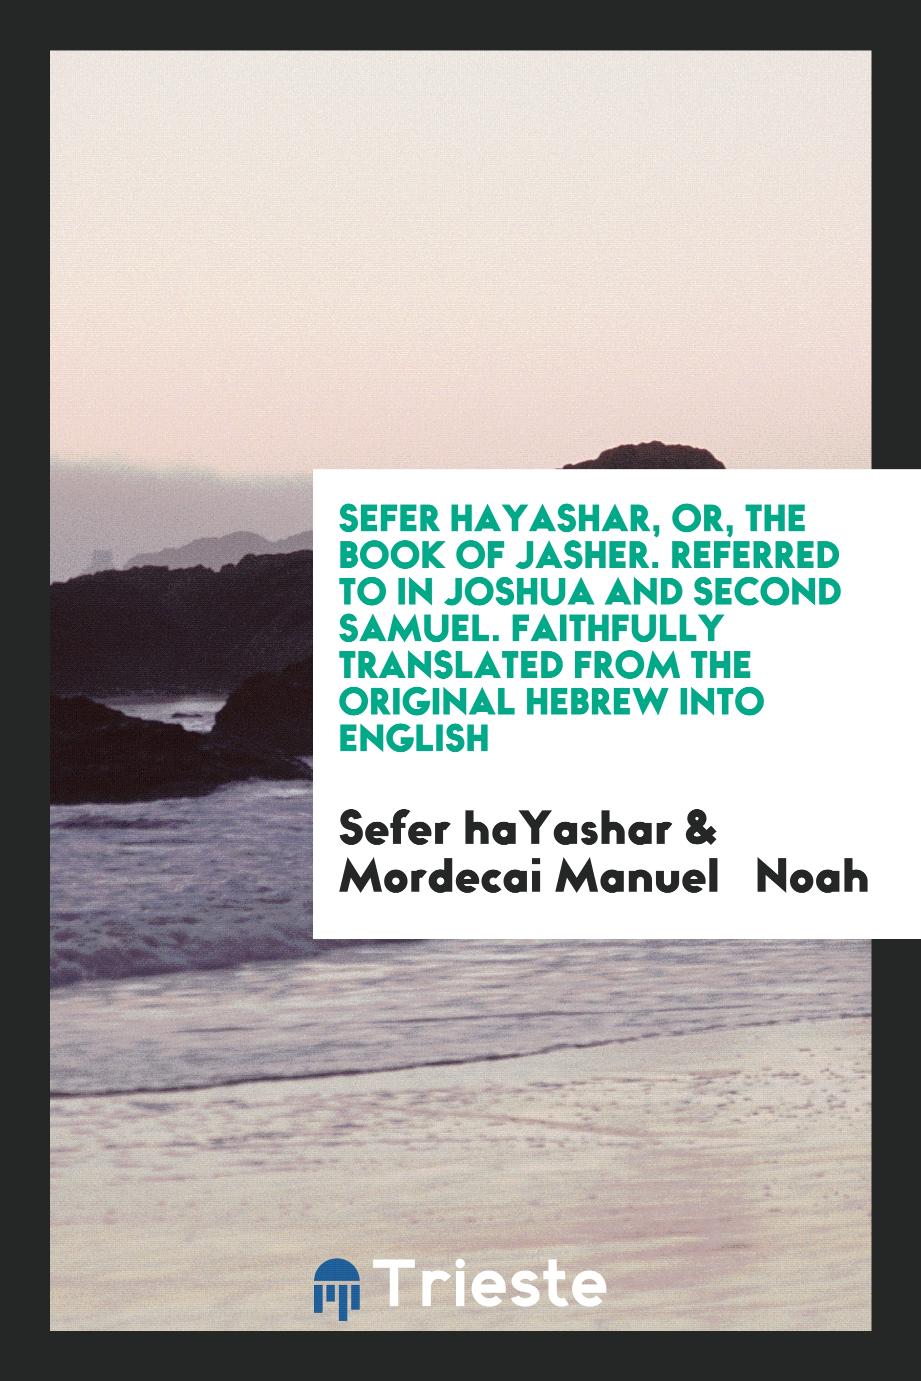 Sefer haYashar, or, The Book of Jasher. Referred to in Joshua and Second Samuel. Faithfully Translated from the Original Hebrew into English